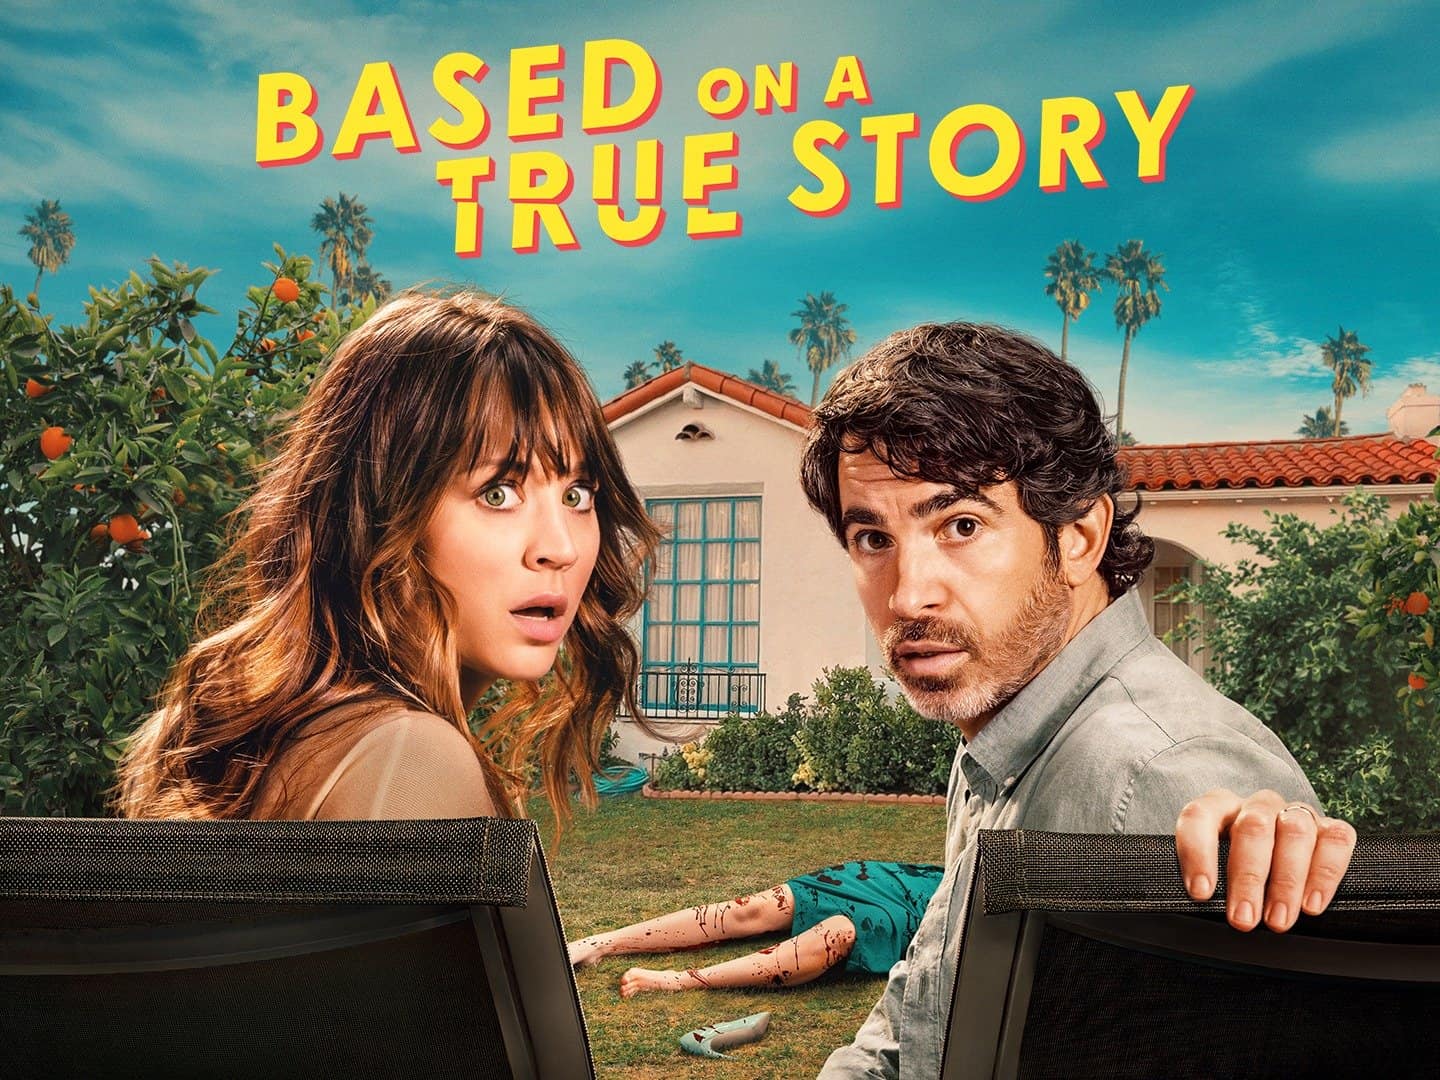 Based on a True Story, starring Kaley Cuoco and Chris Messina.